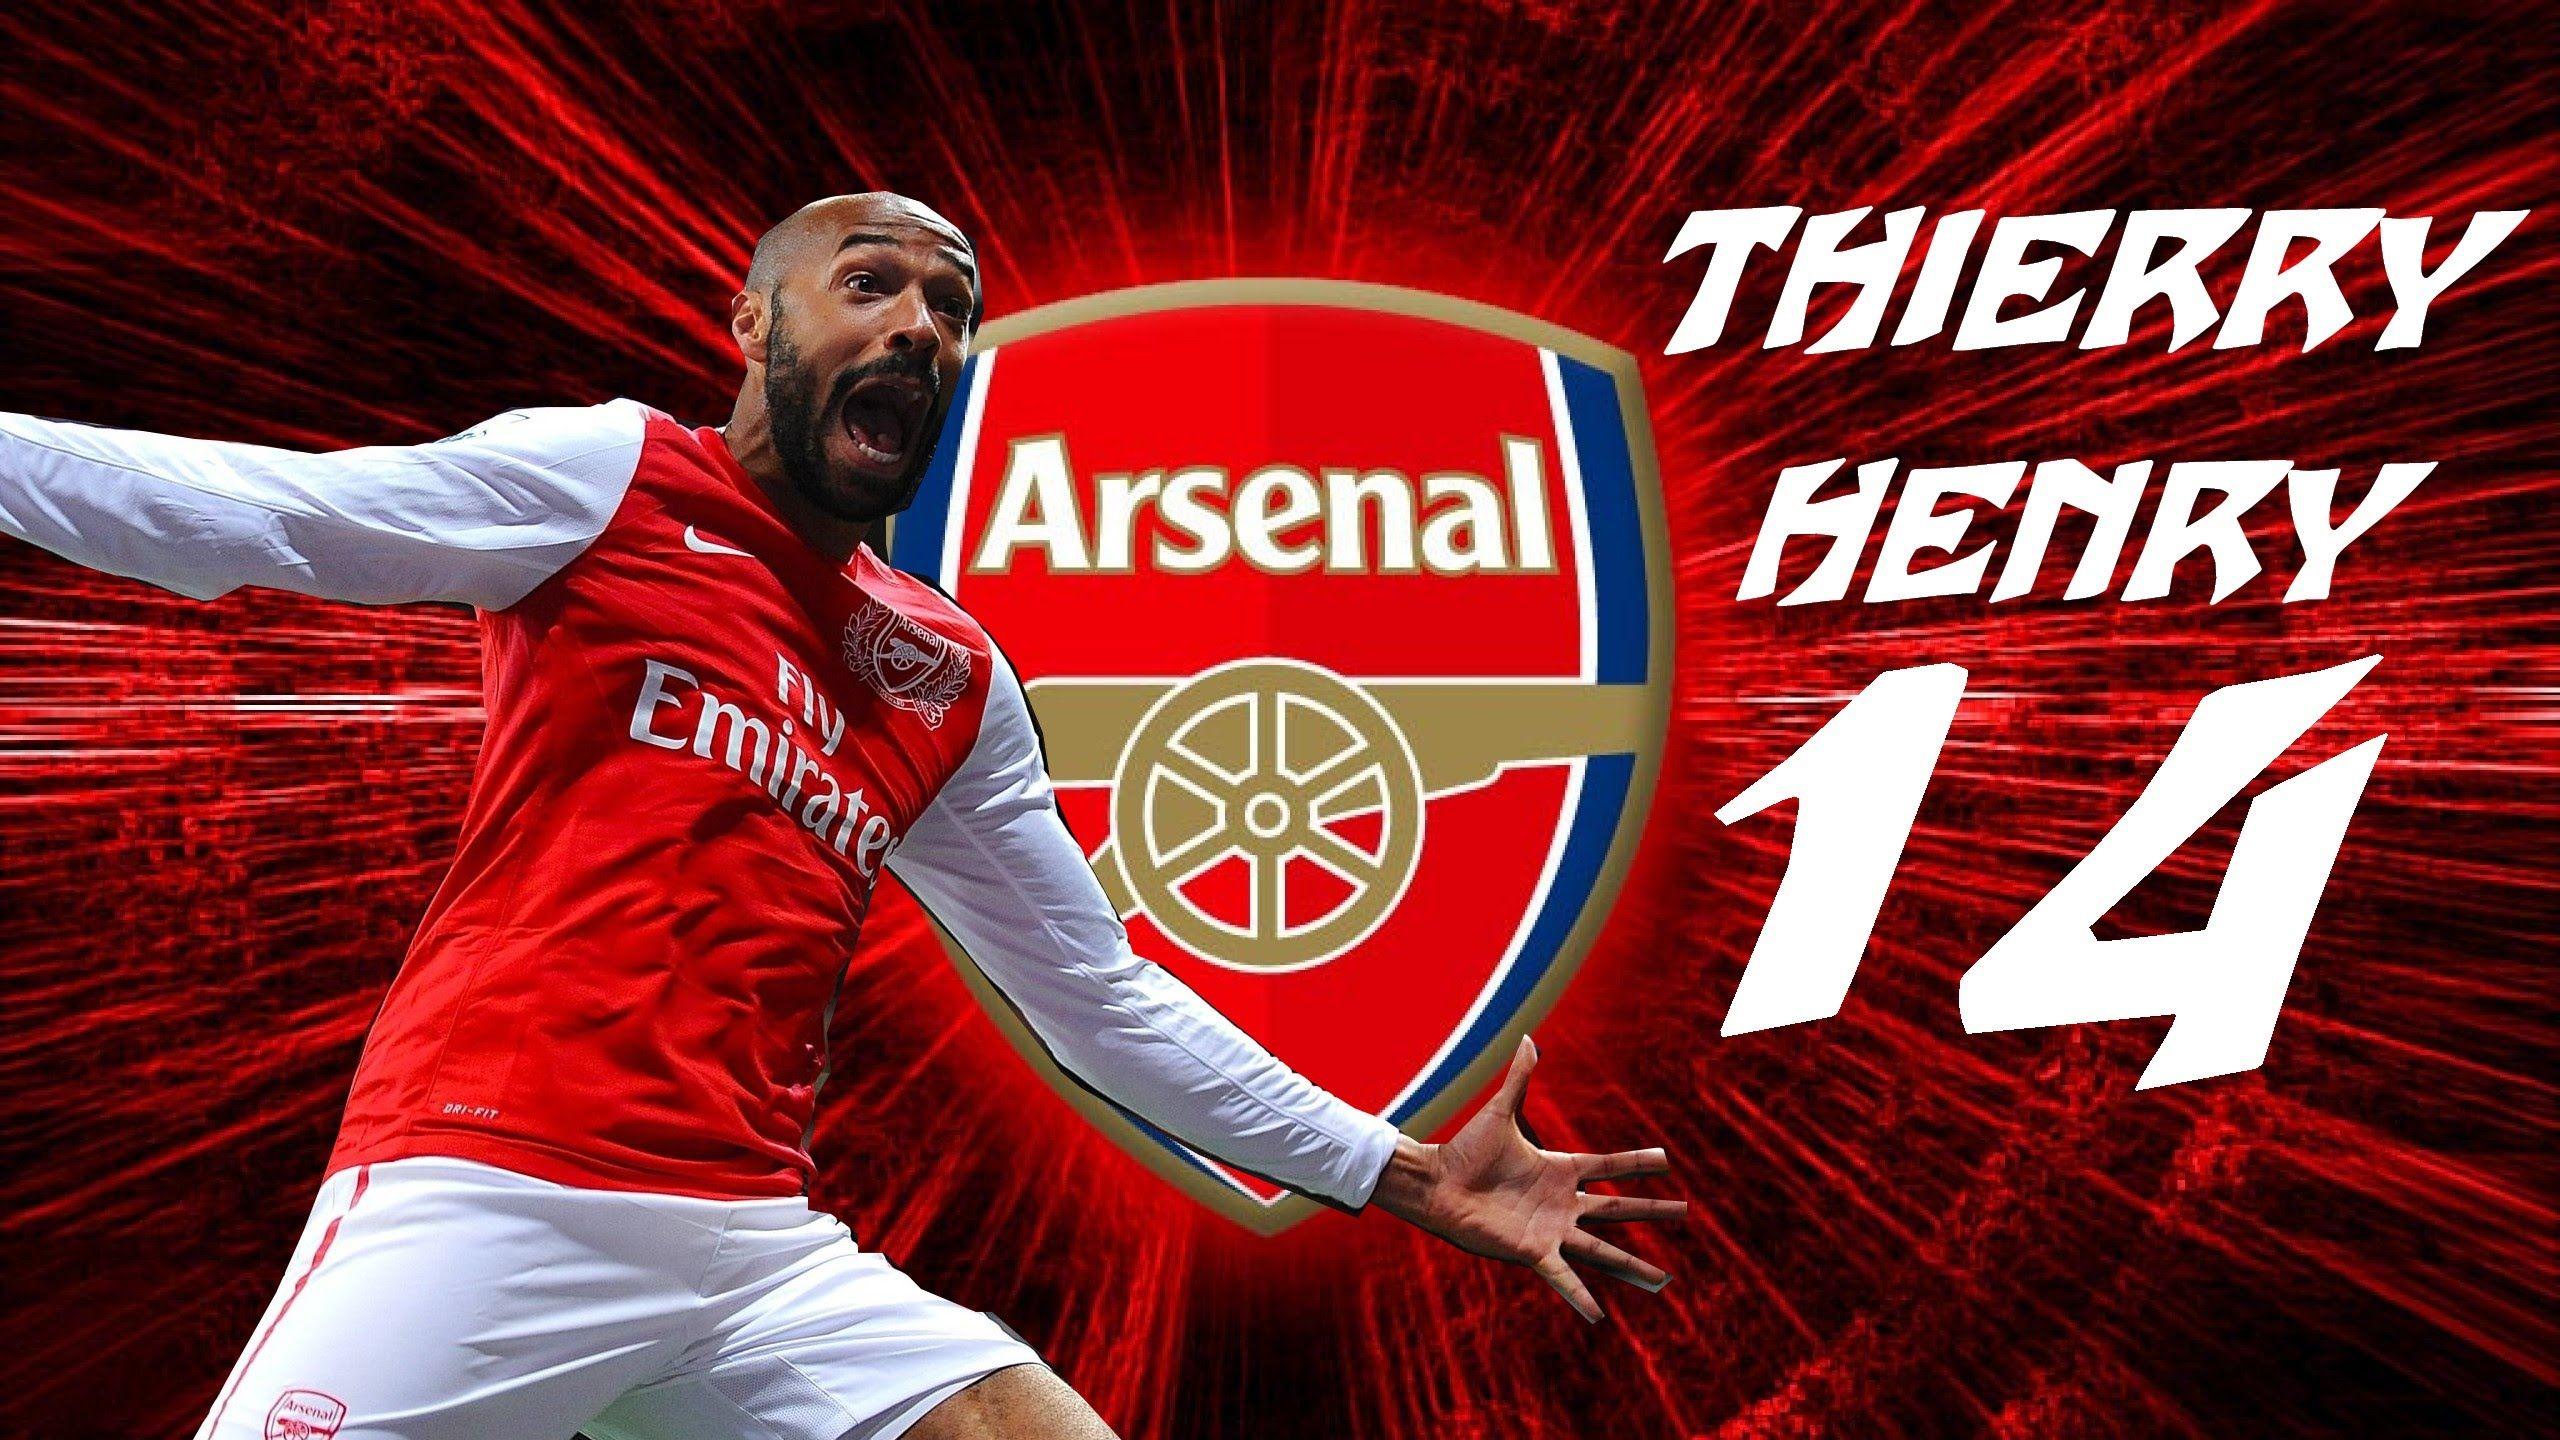 Thierry Henry photo 4 of 8 pics, wallpaper - photo #447973 - ThePlace2